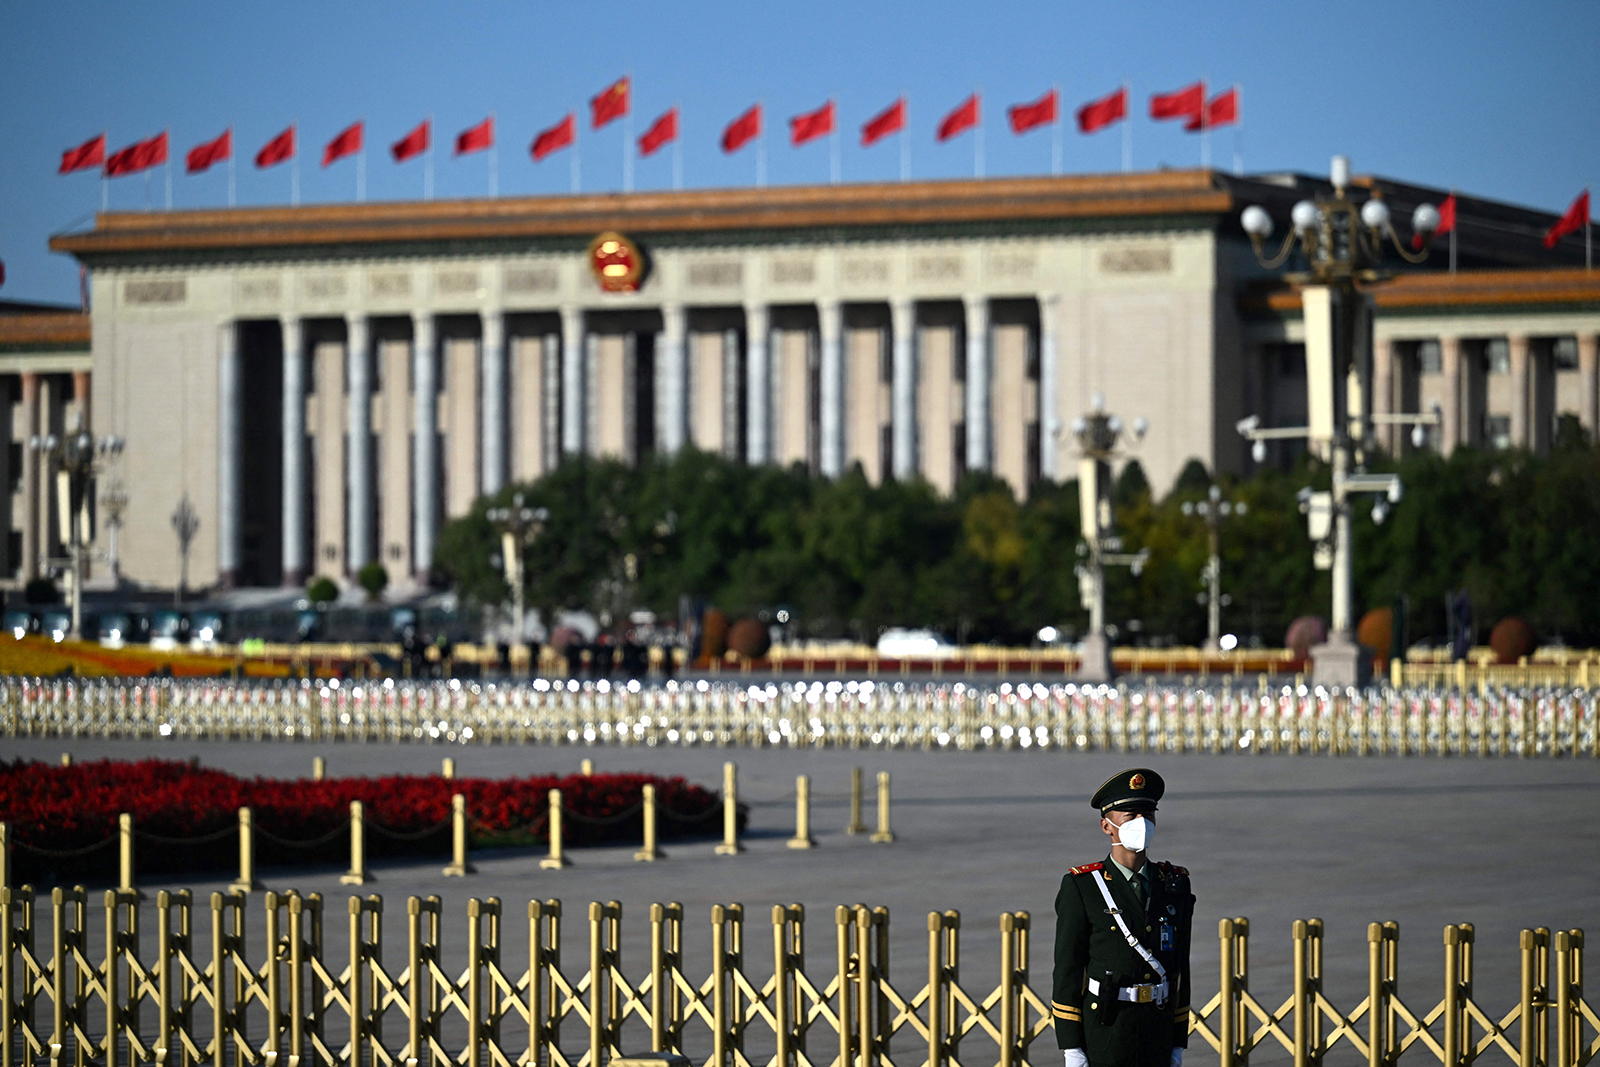 A member of the security staff keeps watch in front of the Great Hall of the People in Beijing on October 16.